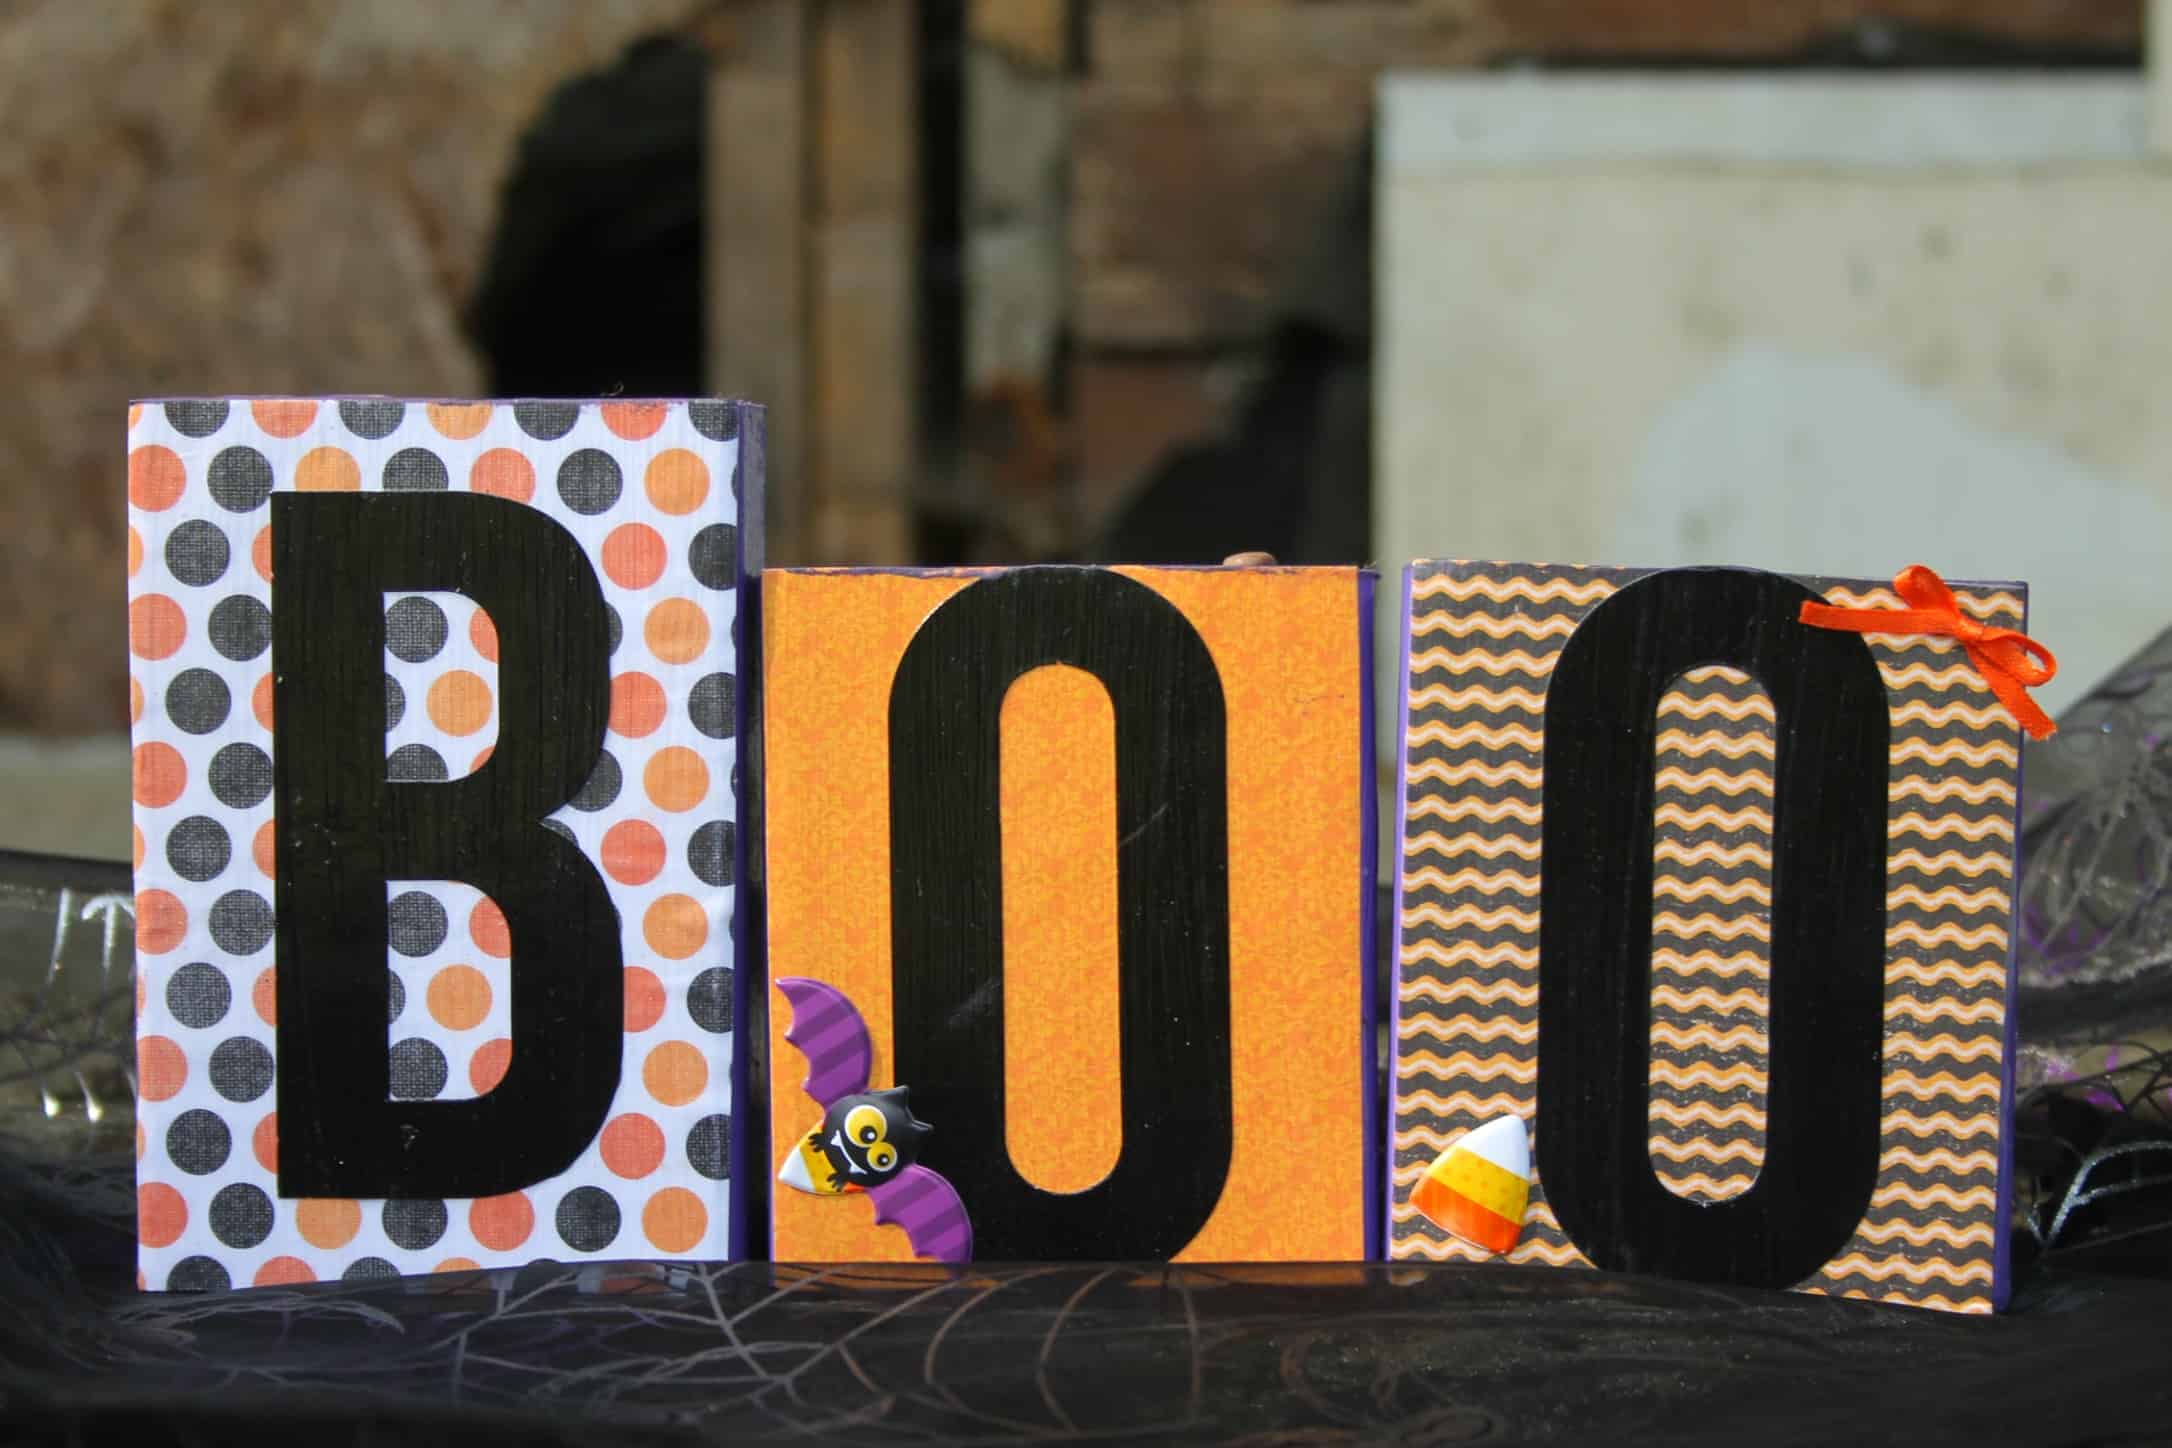 Need some indoor Halloween decorating ideas? Make this Halloween Boo Block DIY! You'll have decor that can be used year after year with this simple and fun project.